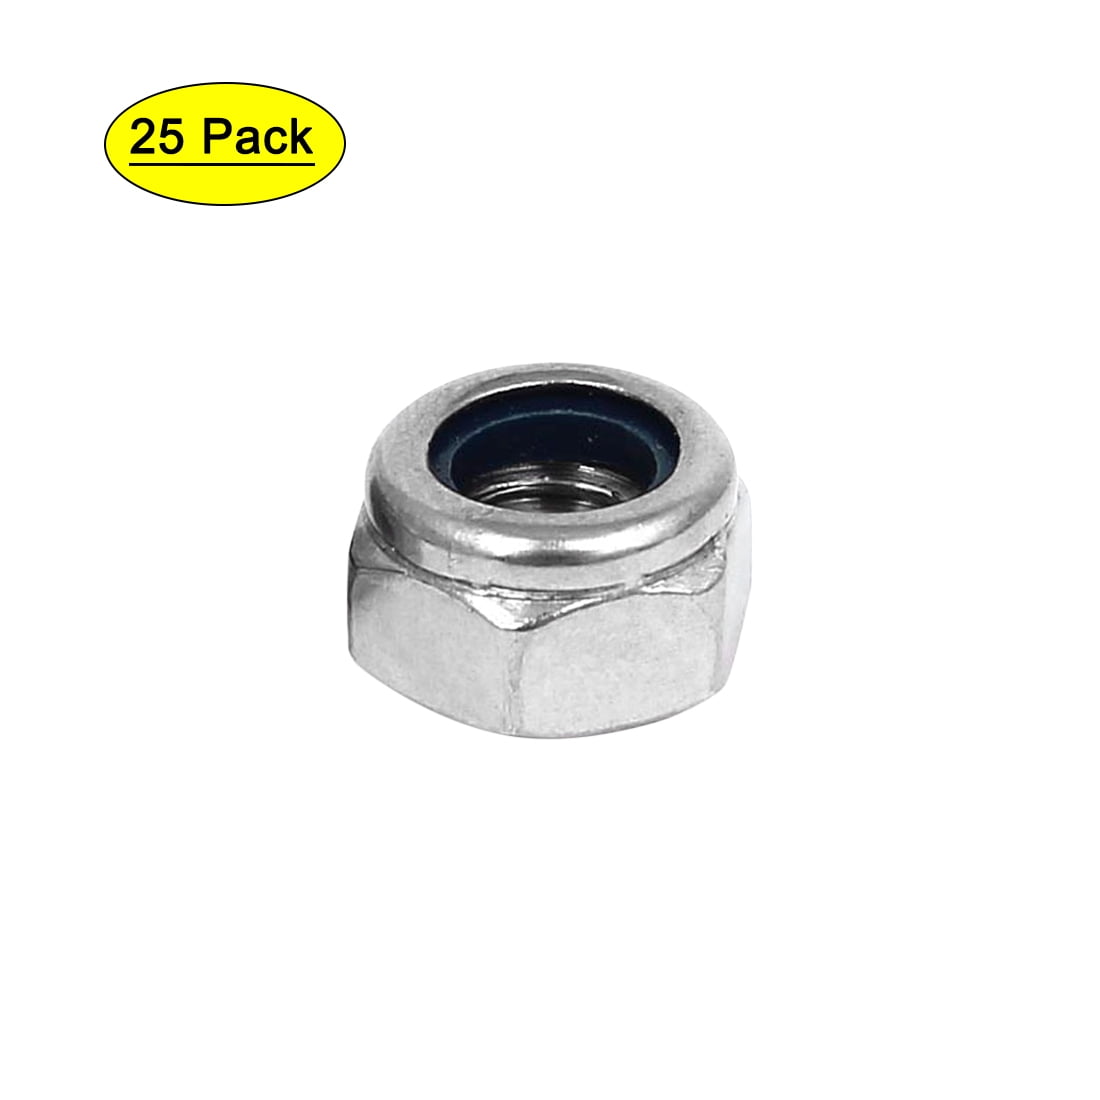 M10*1.25 pitch 304 Stainless Blind Nut Ball Knobs HEX Acorn Nuts